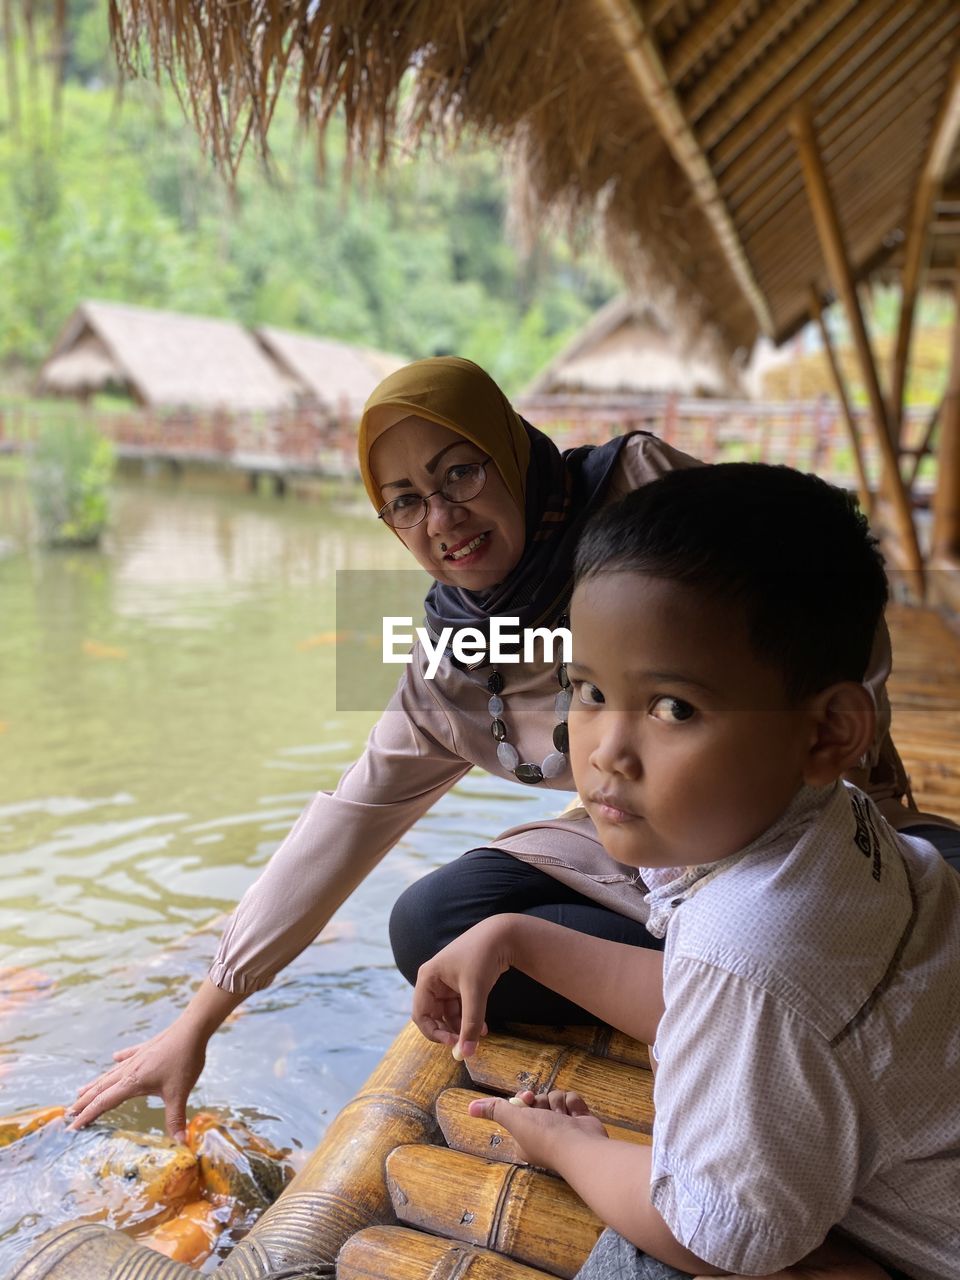 She has to educate her son by nature at saung mang engking lembang west java